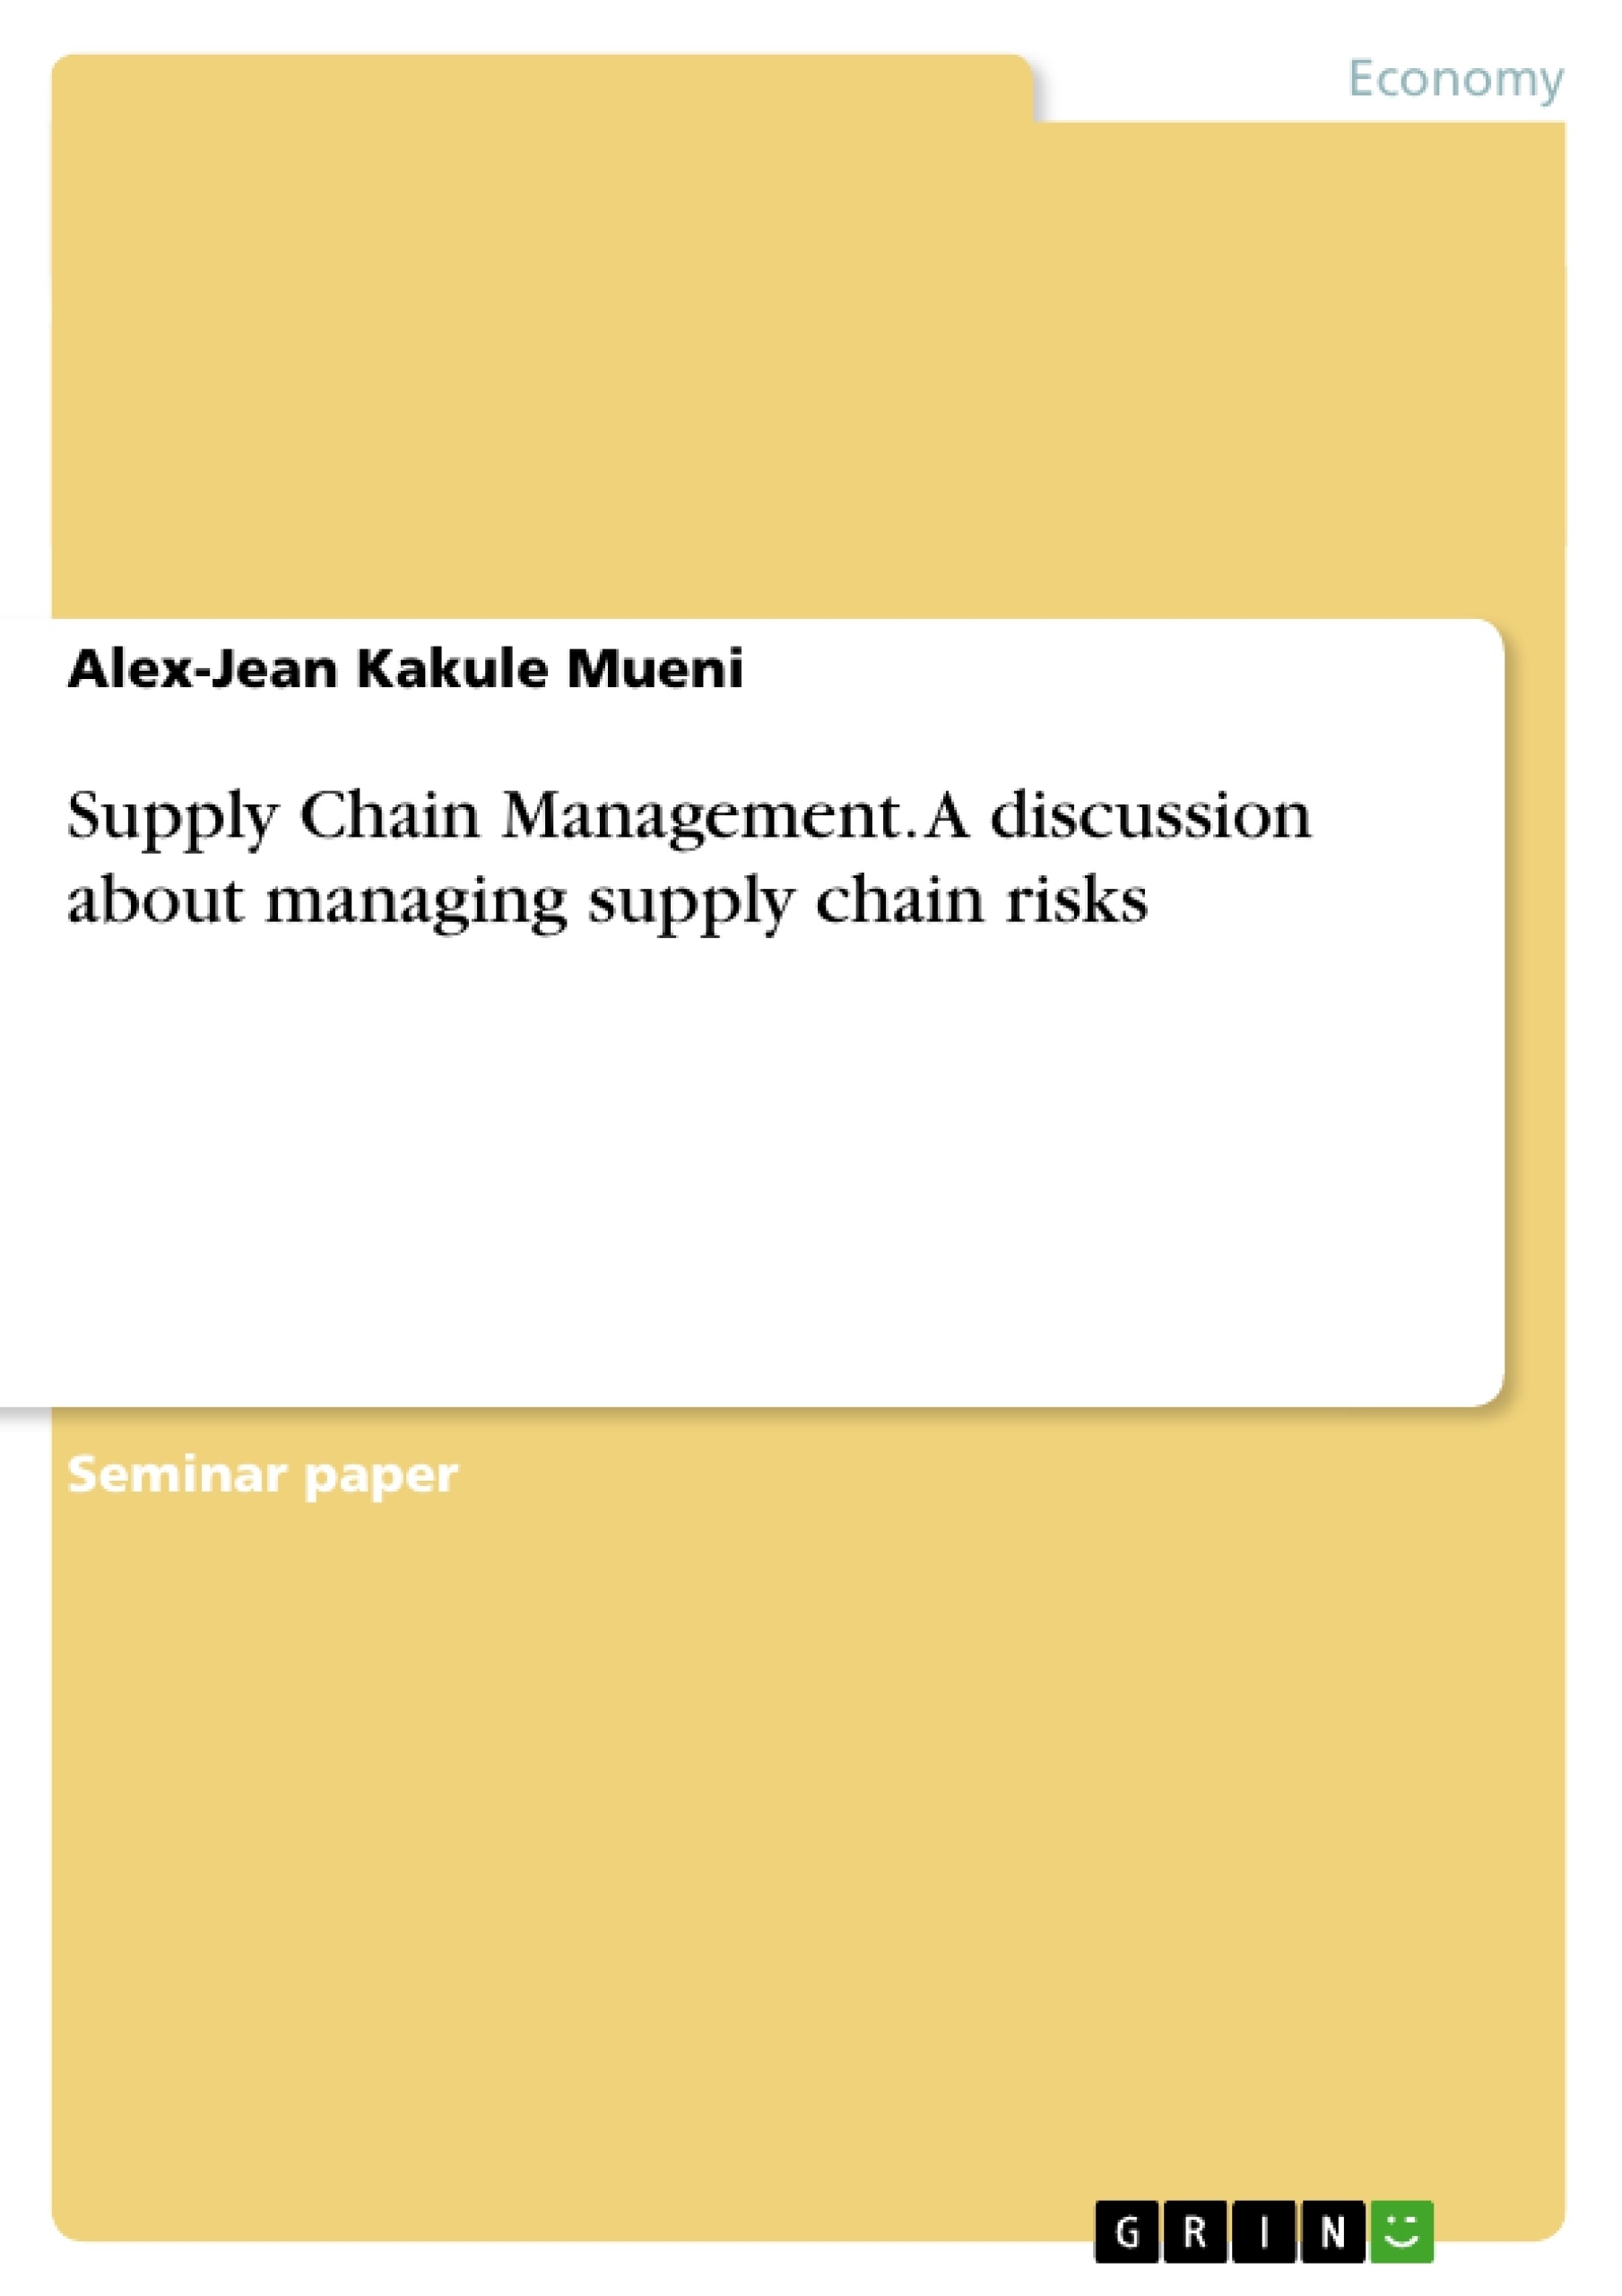 Title: Supply Chain Management. A discussion about managing supply chain risks